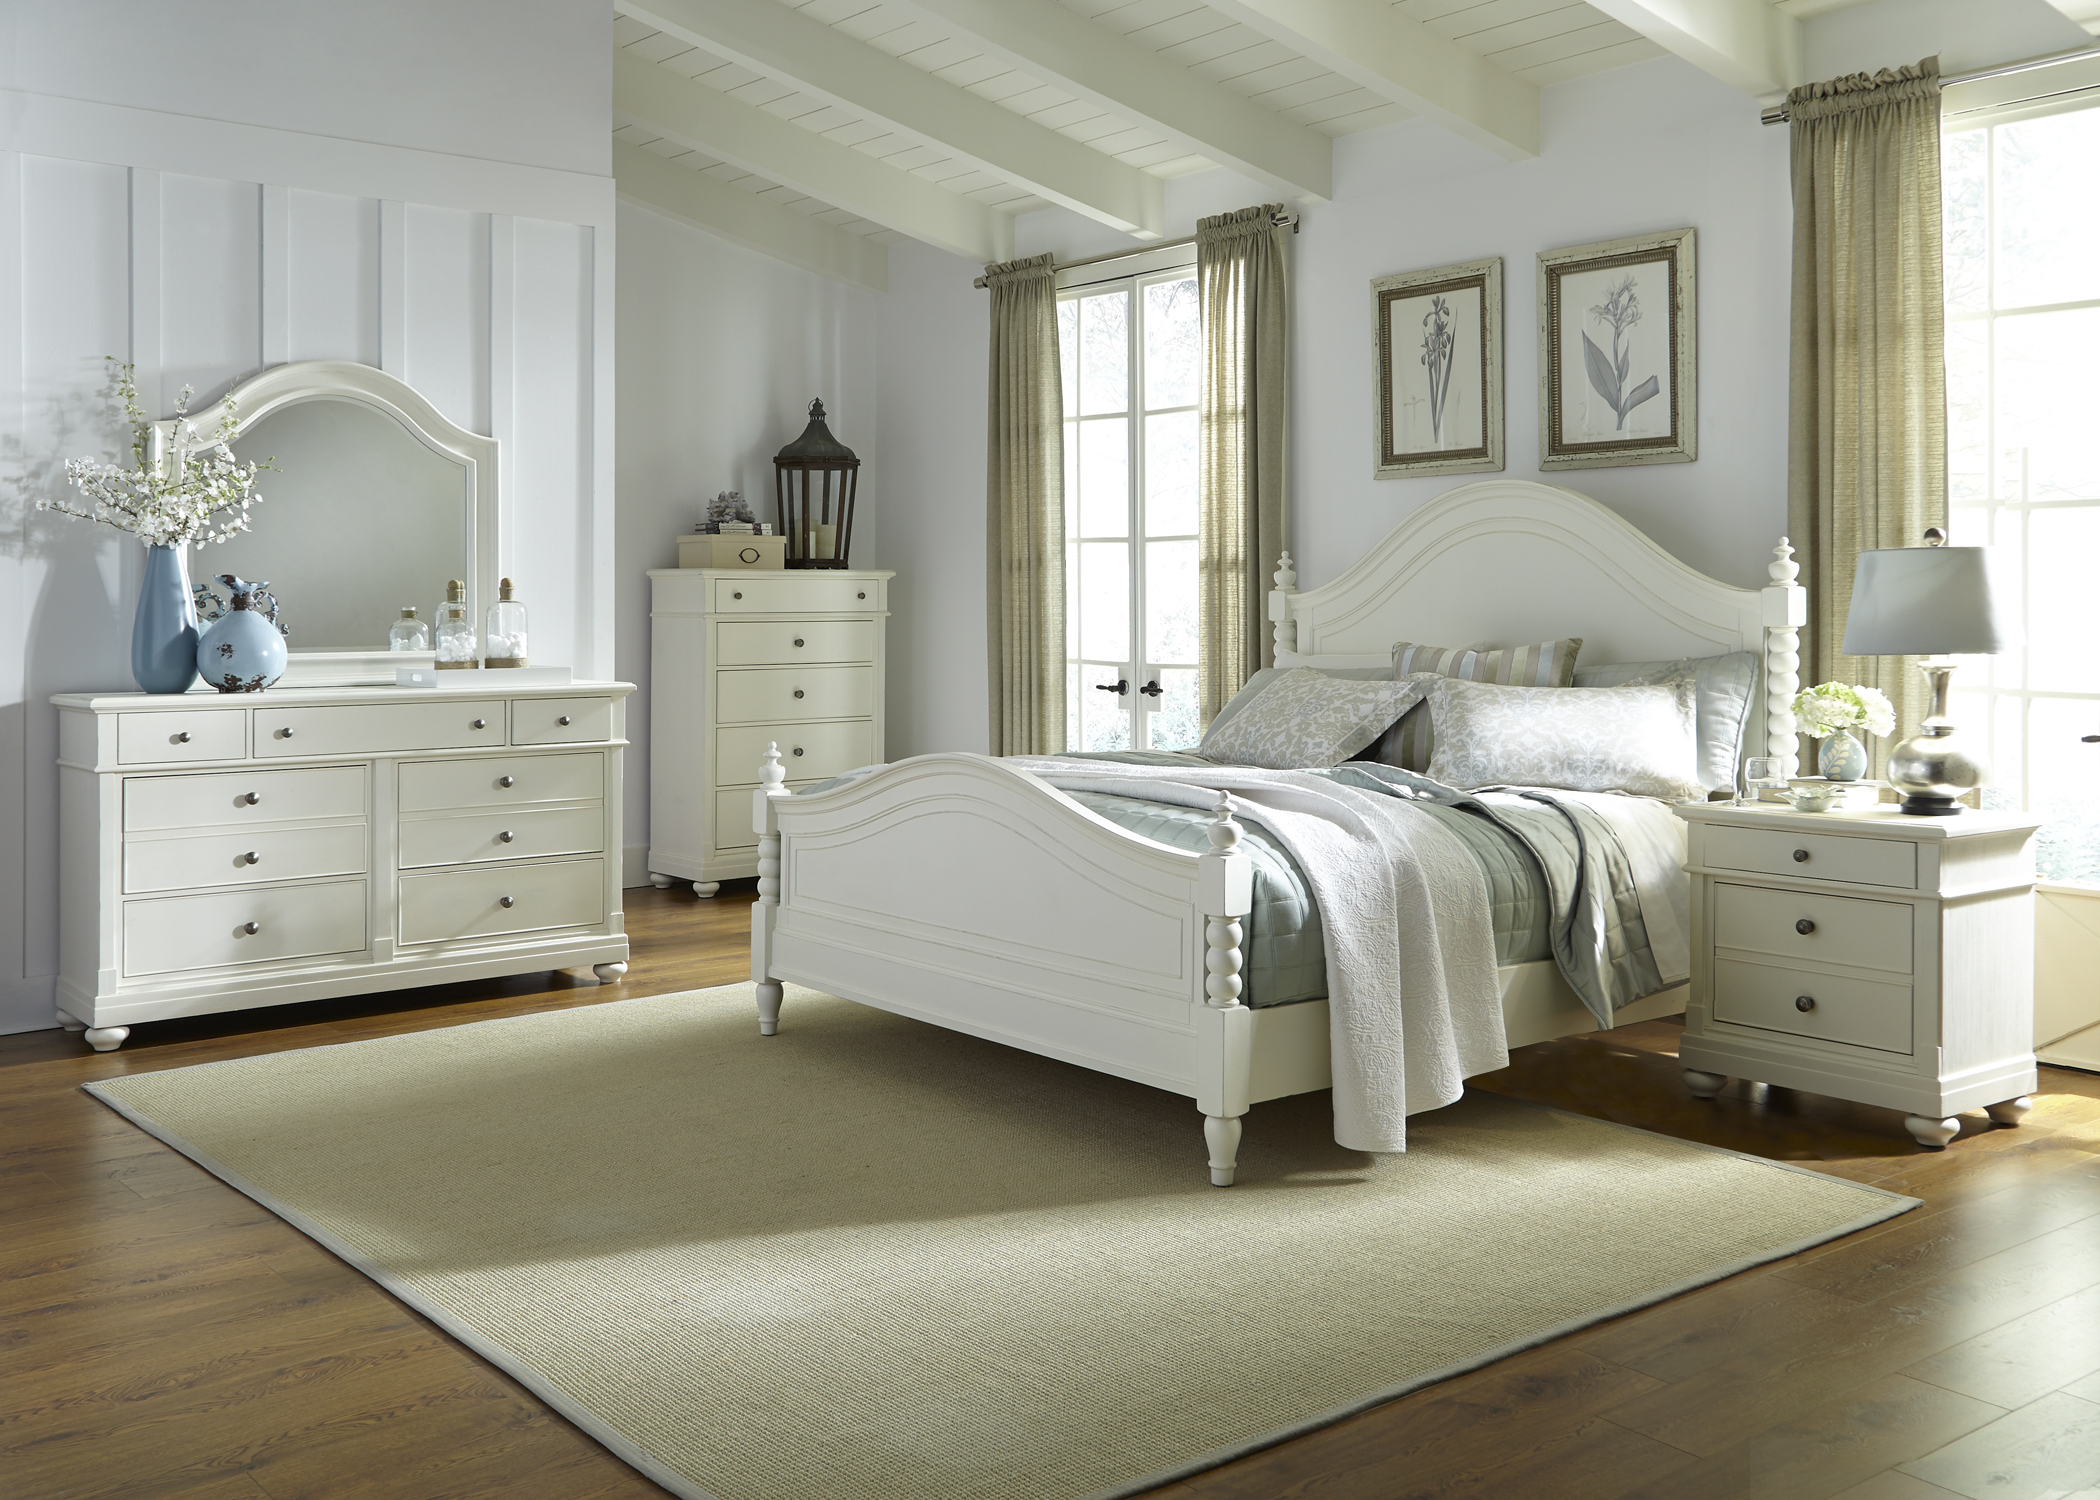 Liberty Furniture Harbor View ll Bedroom Queen Poster Bed, Dresser, Mirror and Nightstand Collection